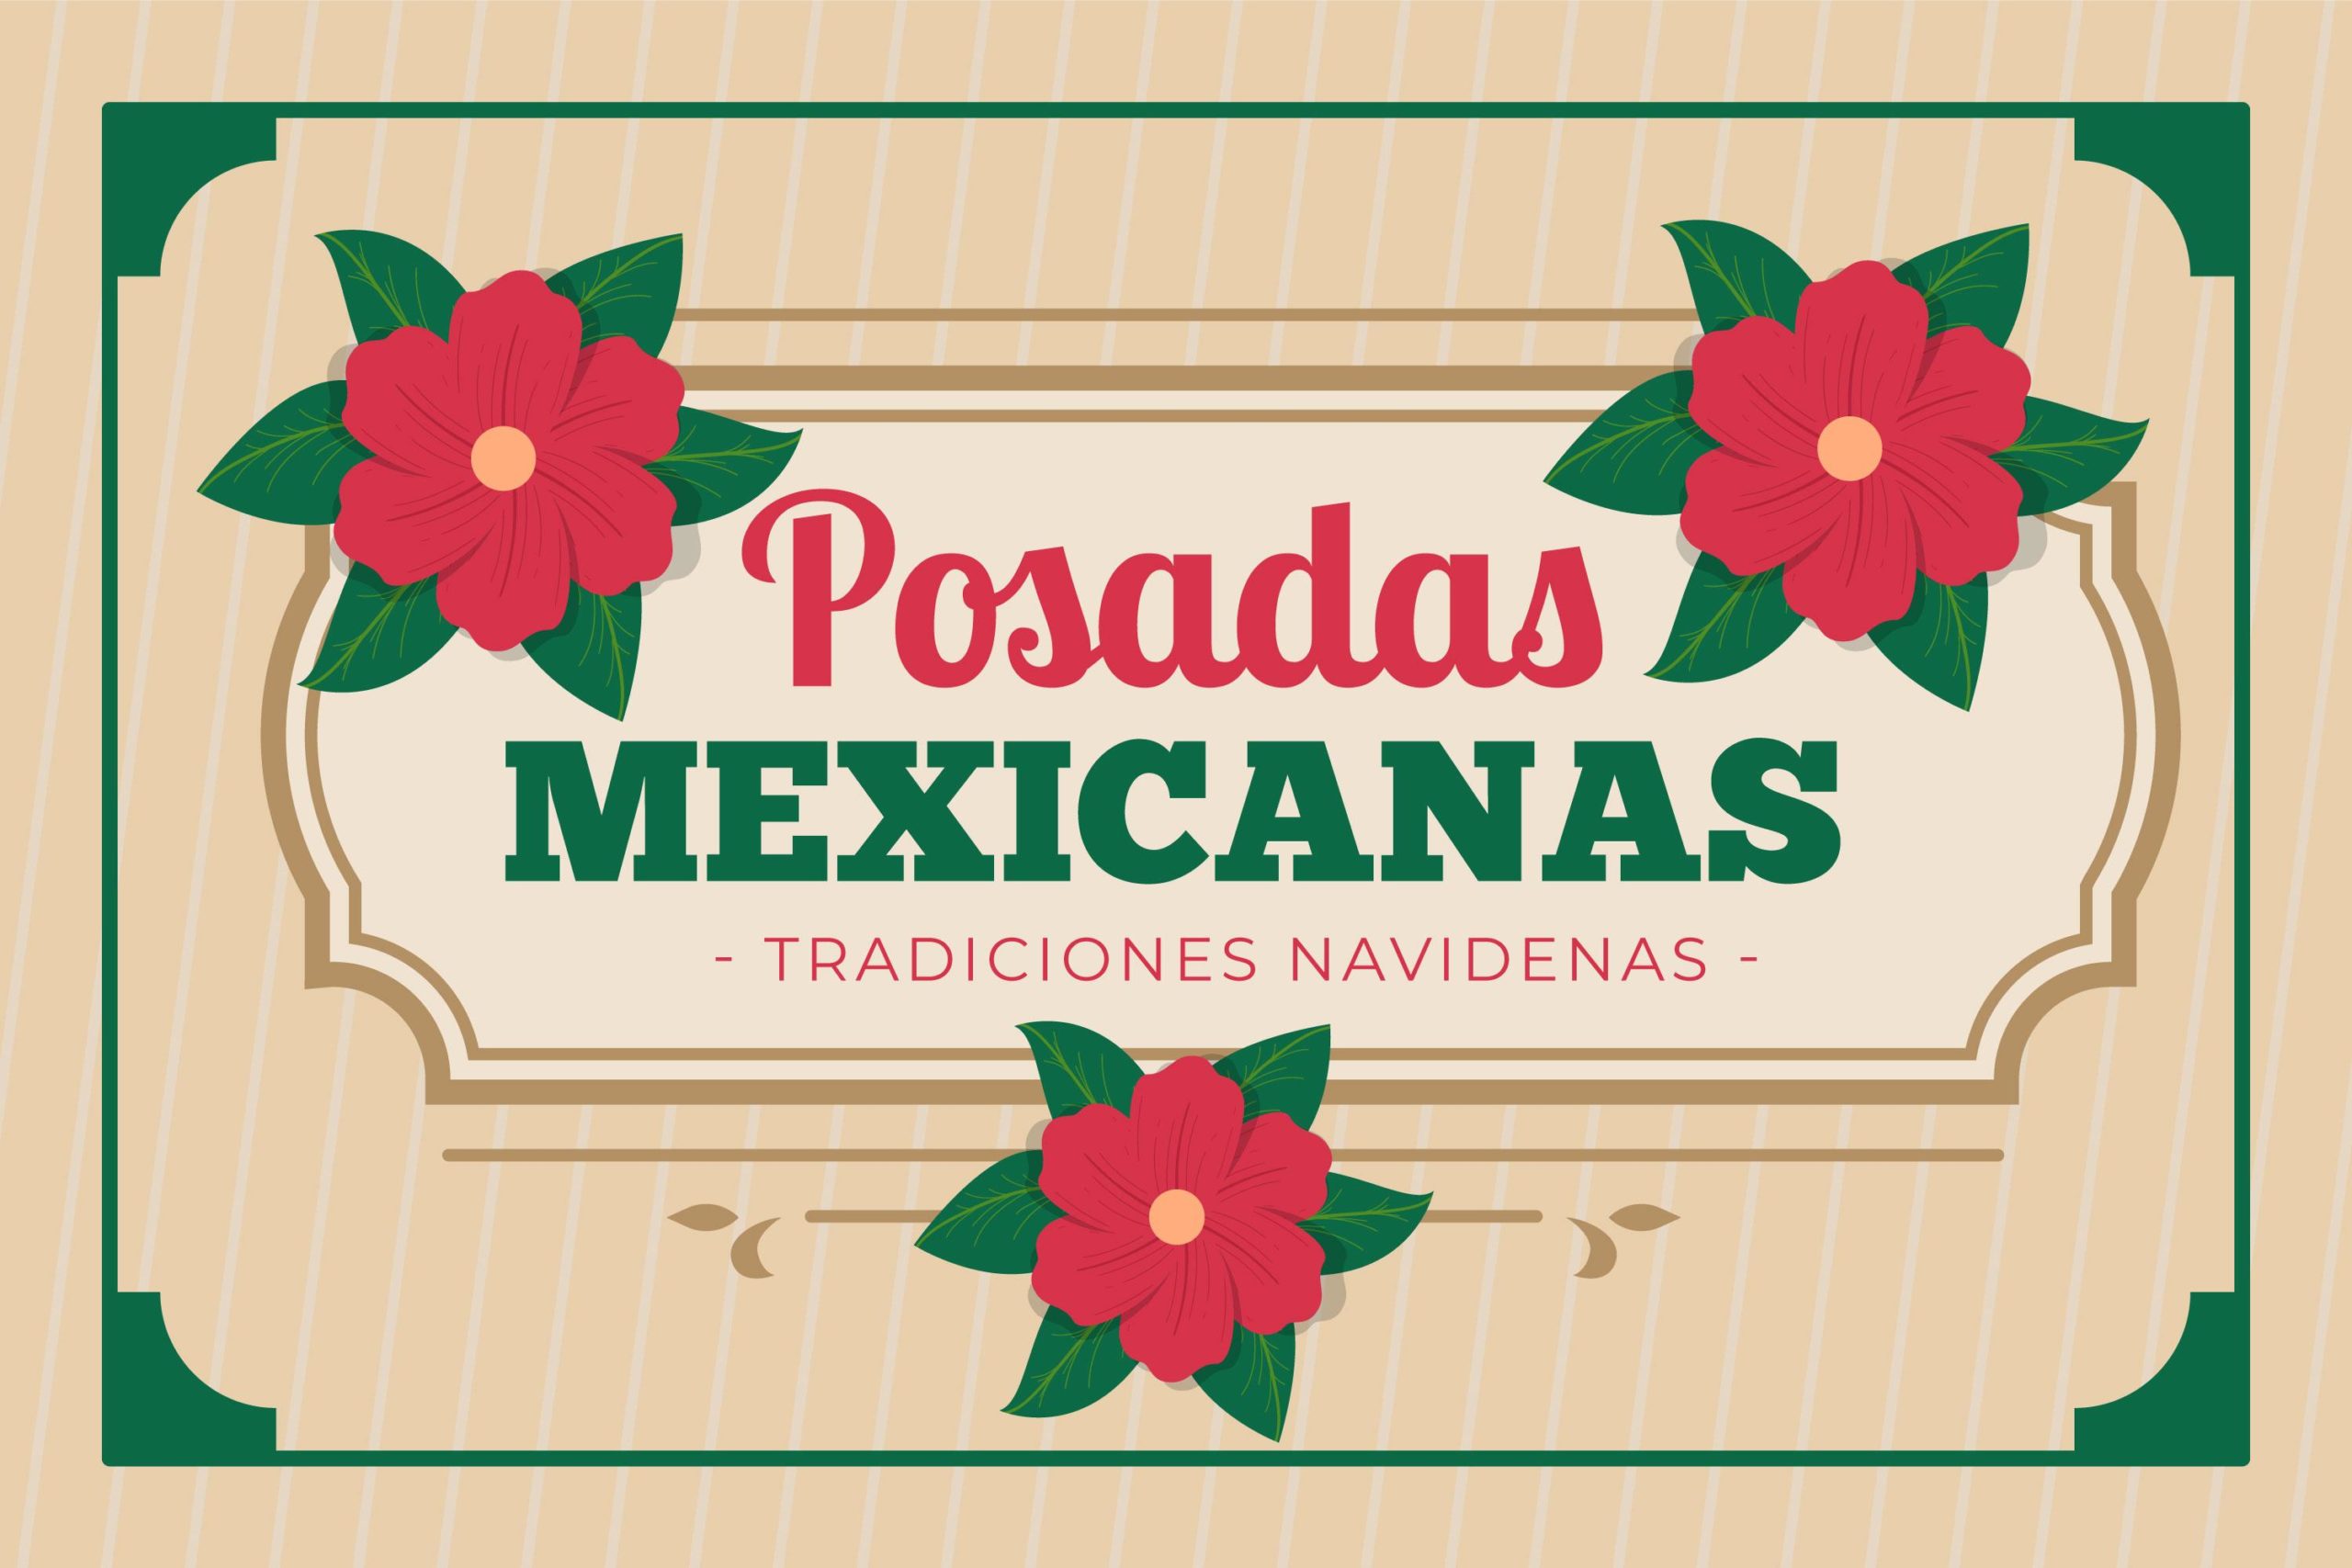 Las Posadas 2022 Best Wishes, Images, Messages, Greetings, Pictures, Sayings, and Quotes to share